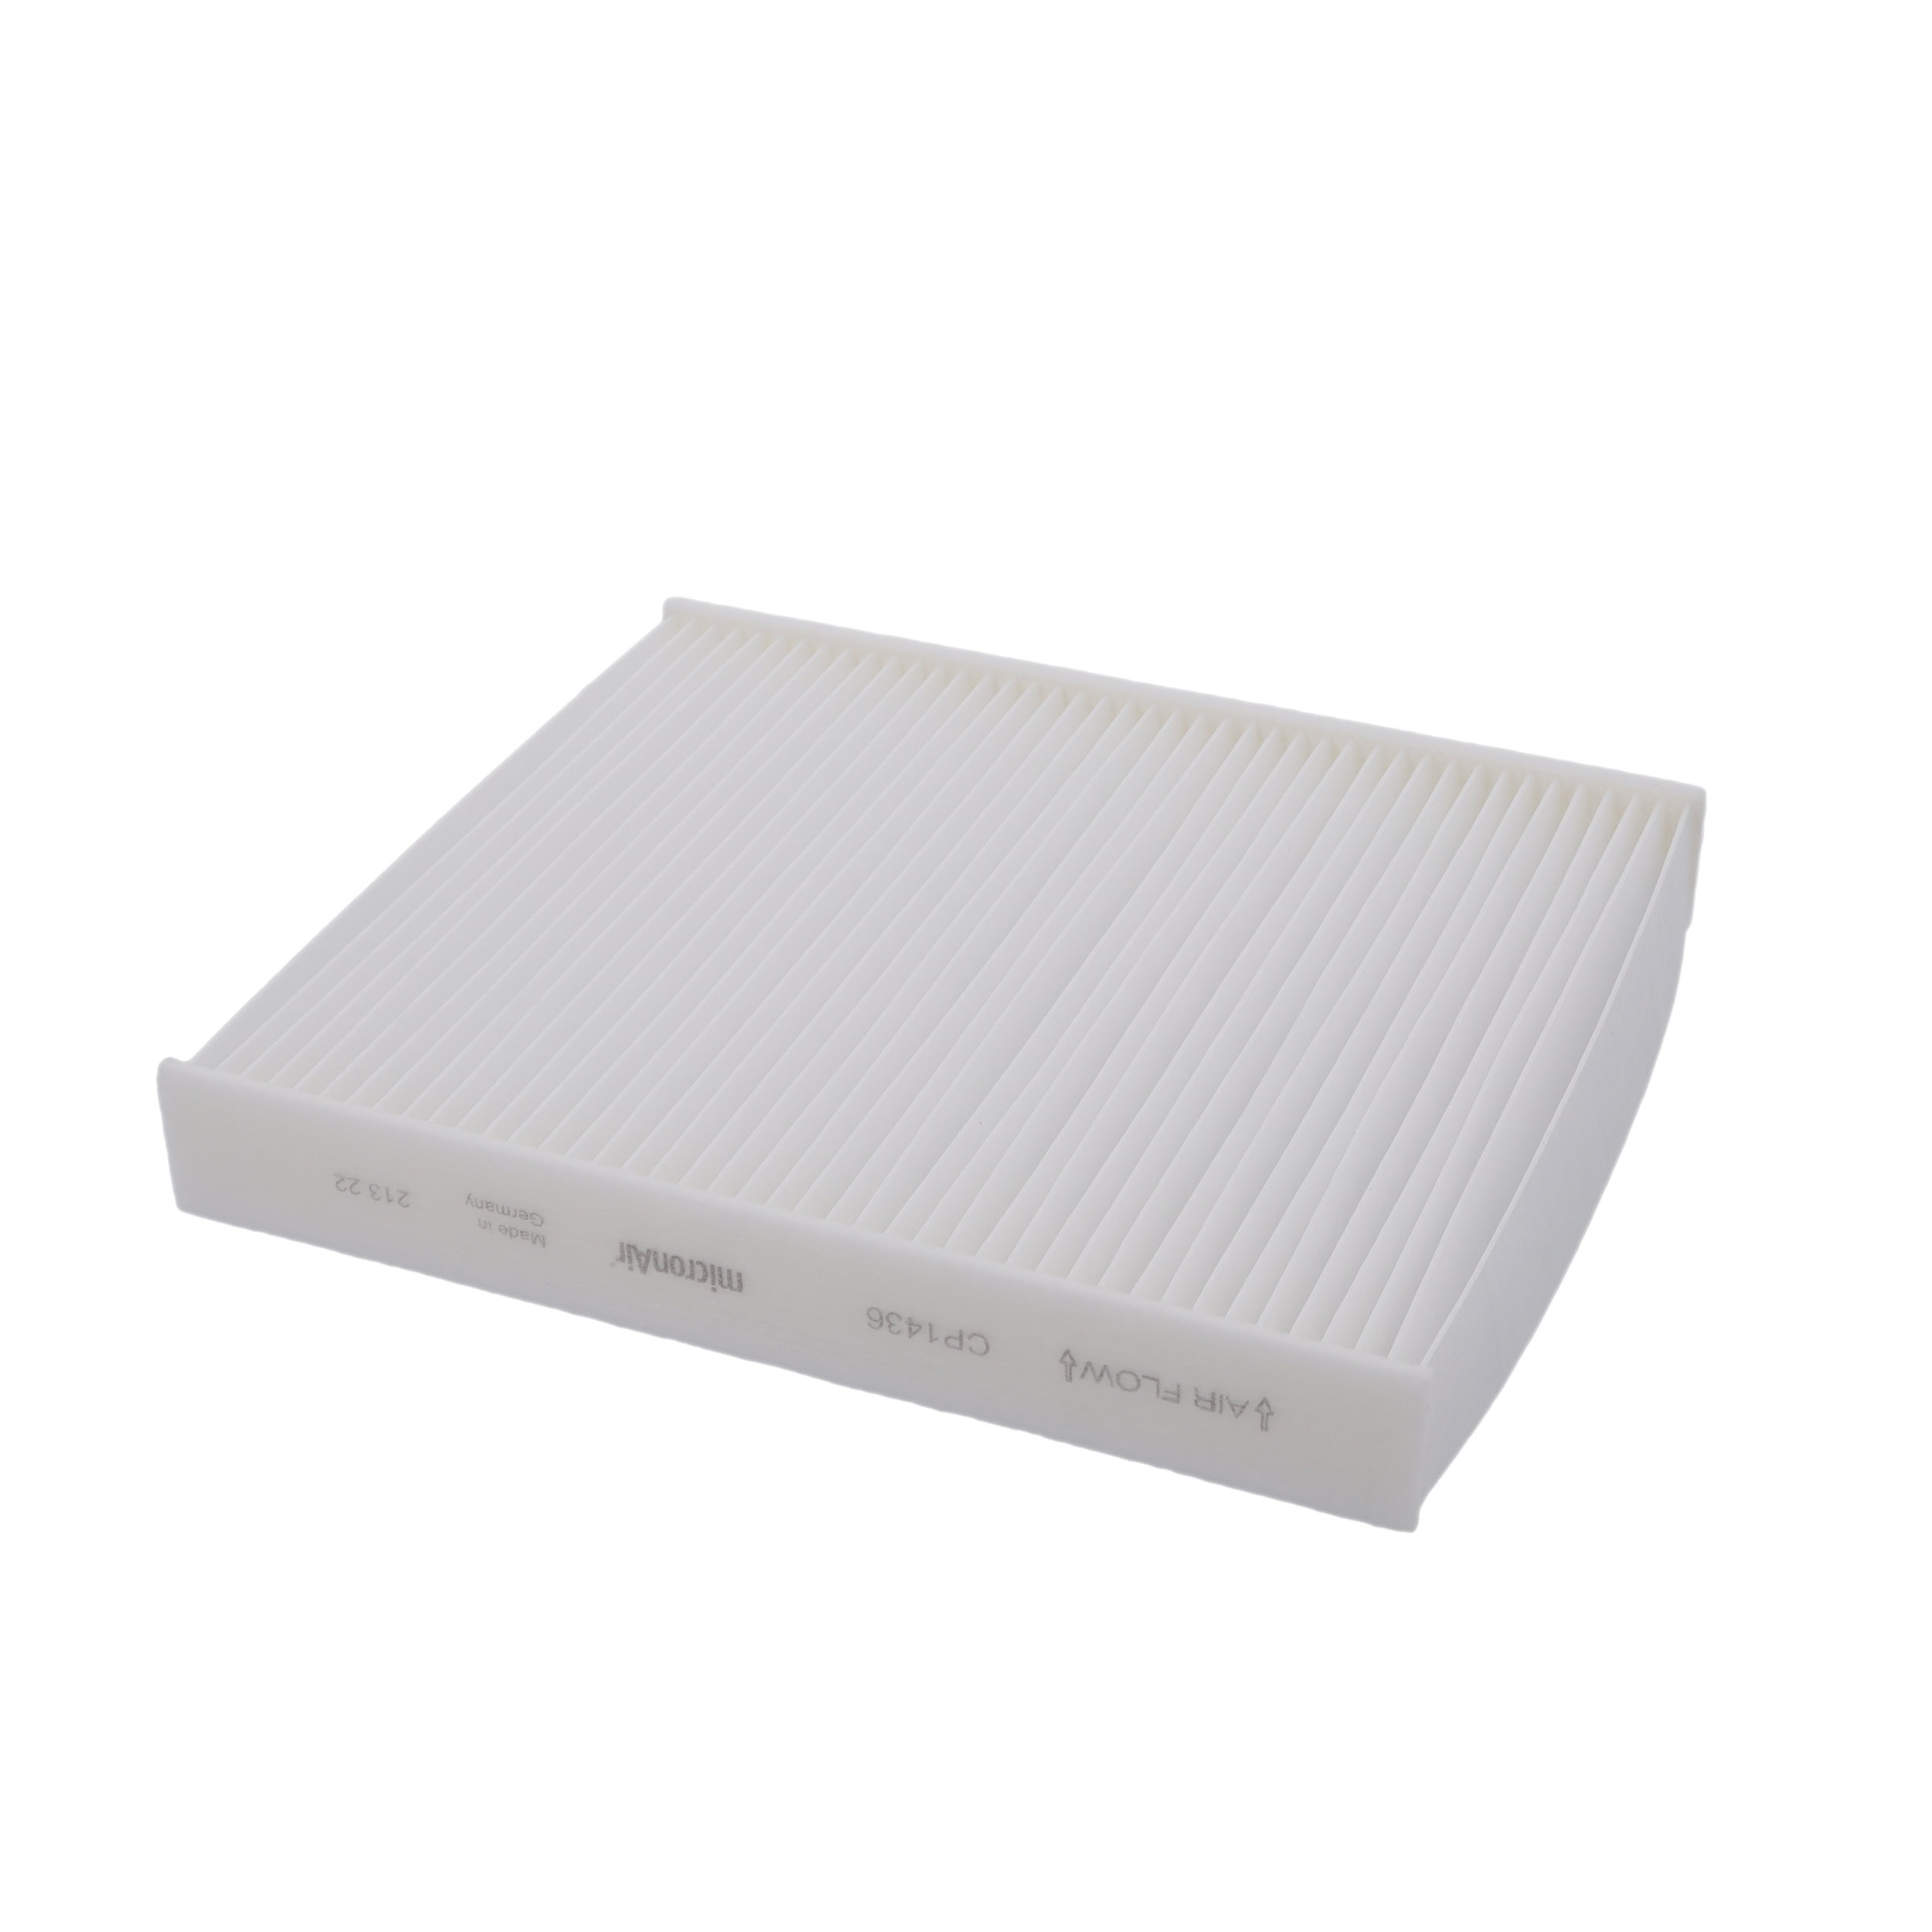 CORTECO Particulate Filter, 252 mm x 224 mm x 36 mm Width: 224mm, Height: 36mm, Length: 252mm Cabin filter 80001783 buy